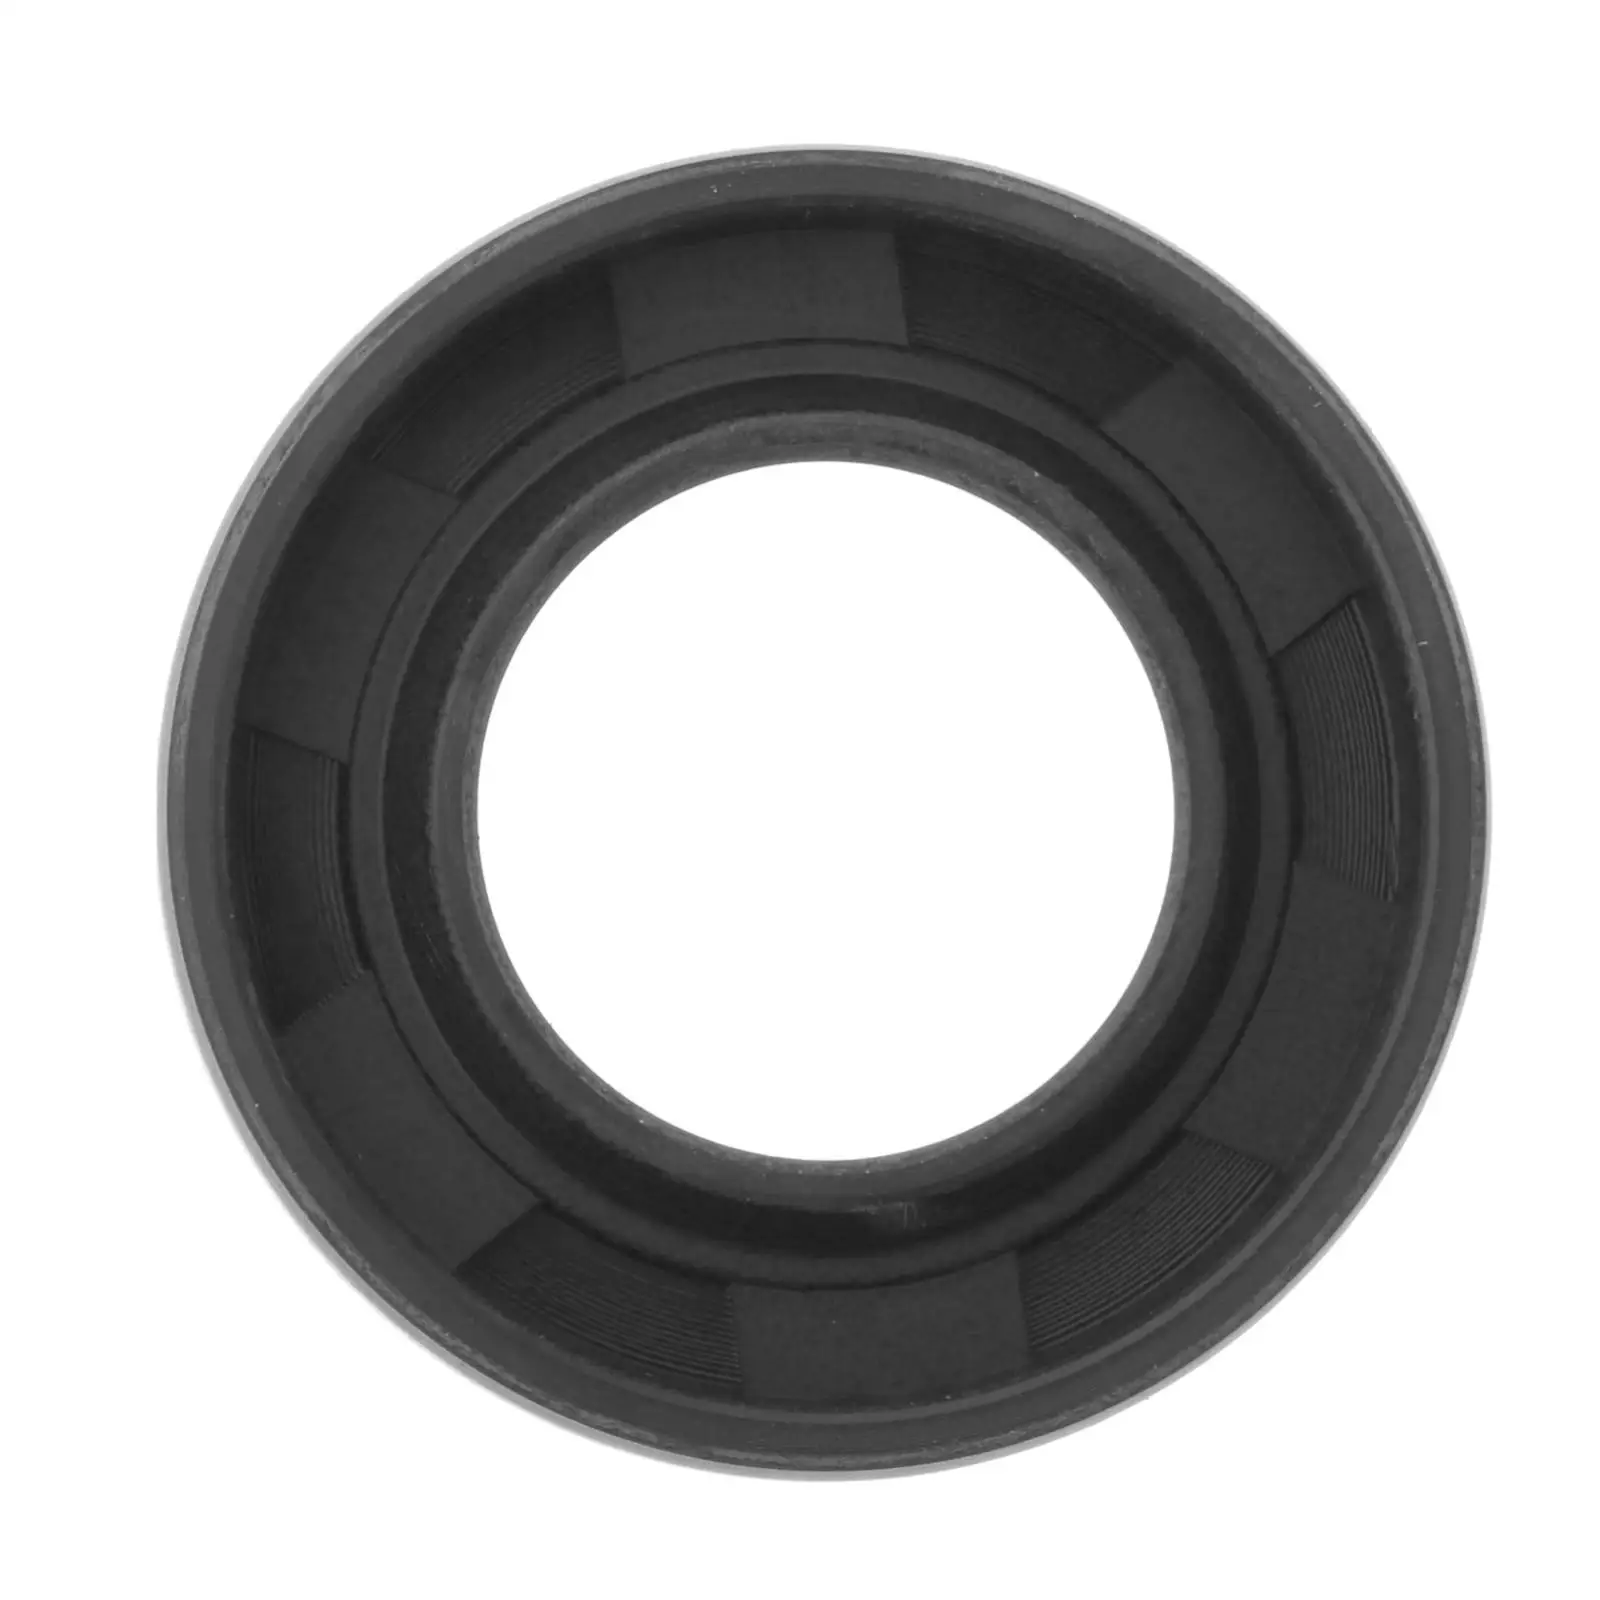 Oil Seal Direct Replaces for Yamaha Outboard 60HP 70HP Outboard Engine